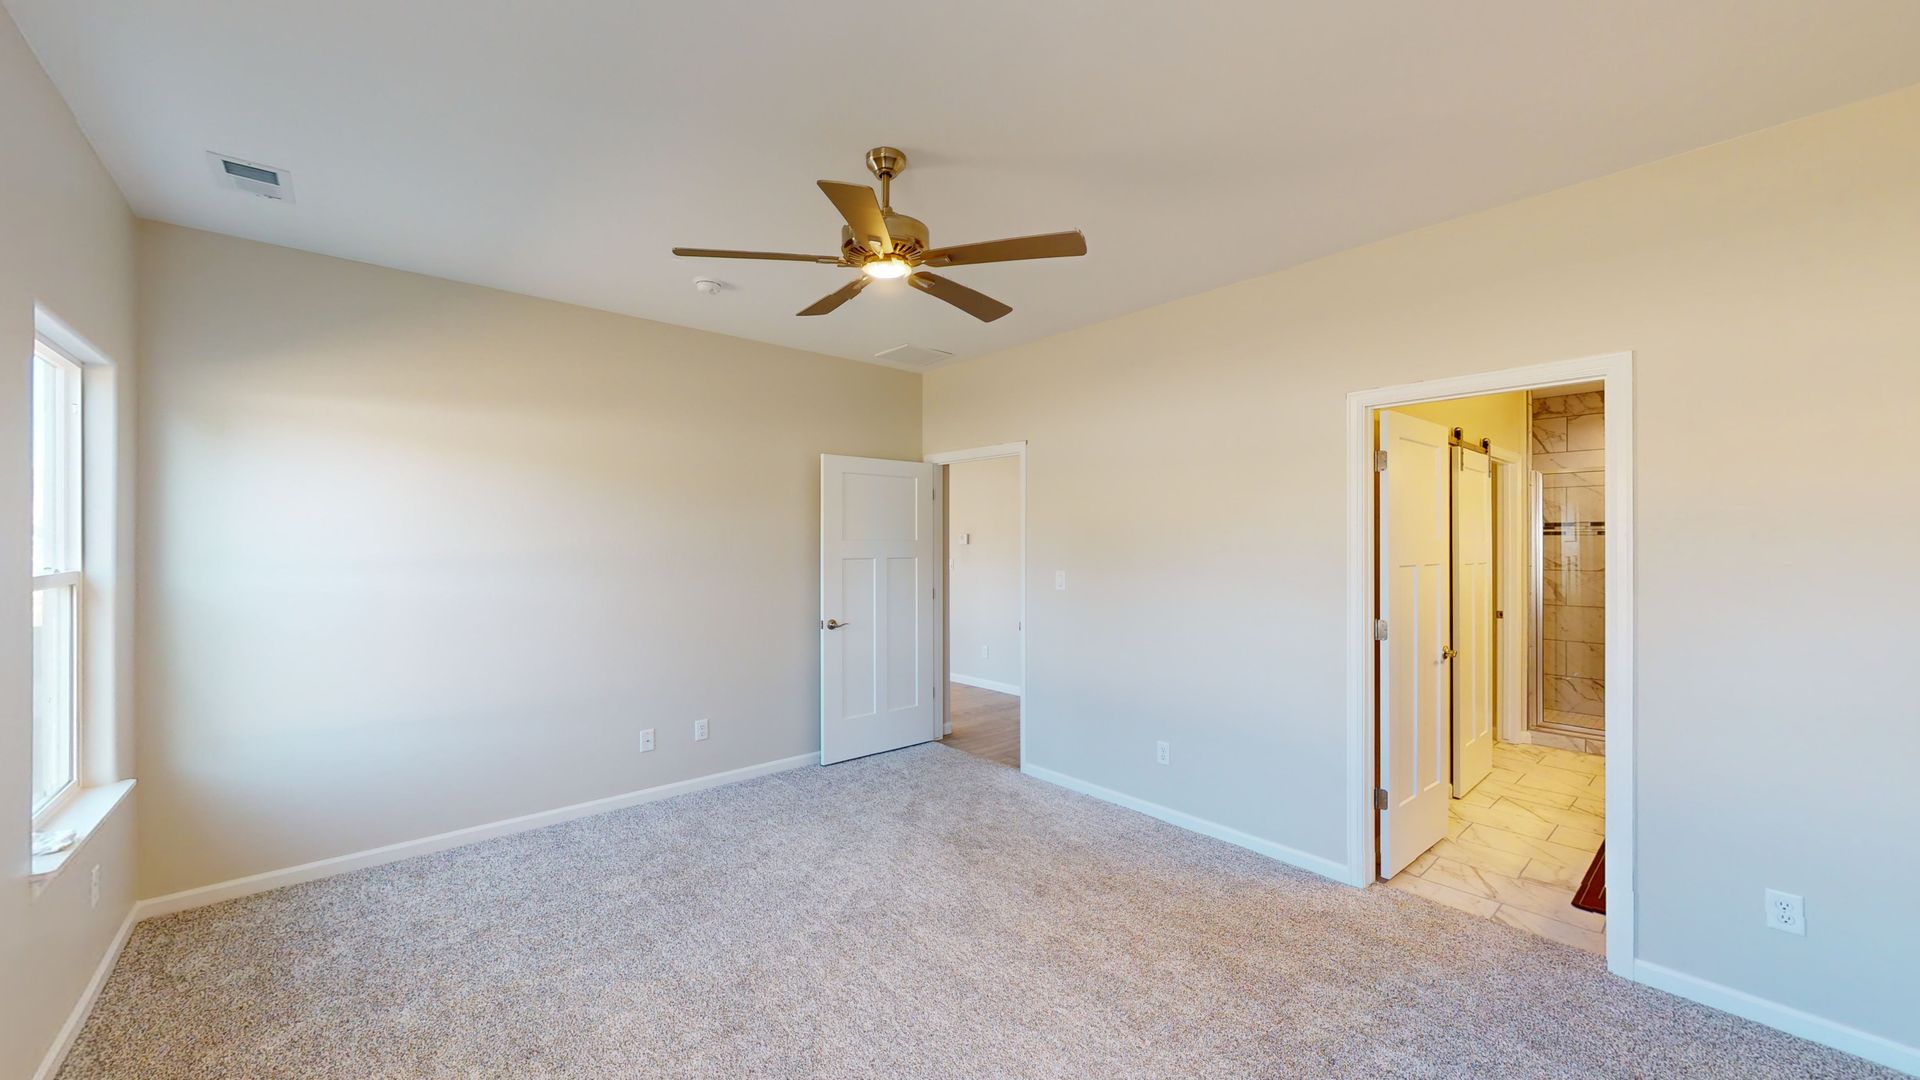 Spacious master bedroom with ceiling fan